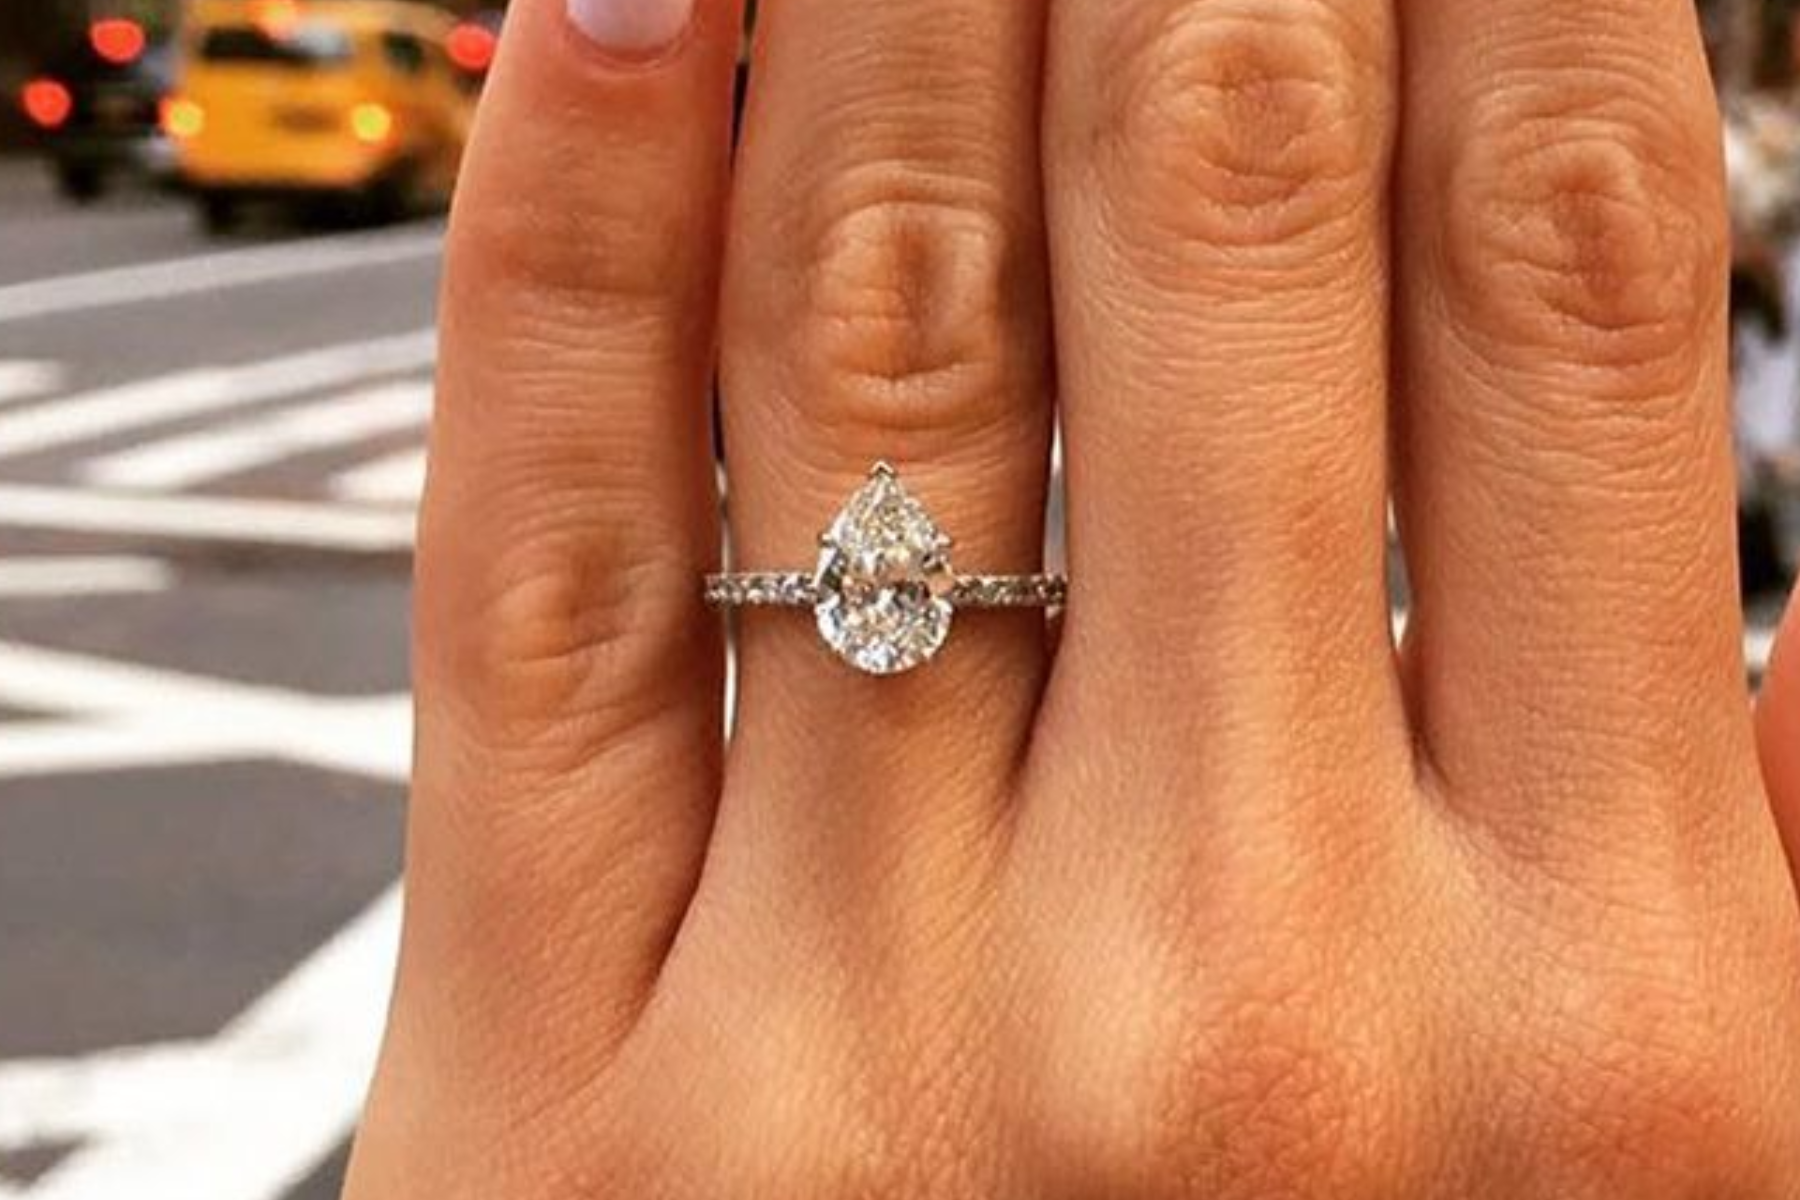 A woman's hand wearing a pear-cut diamond engagement ring in a public setting